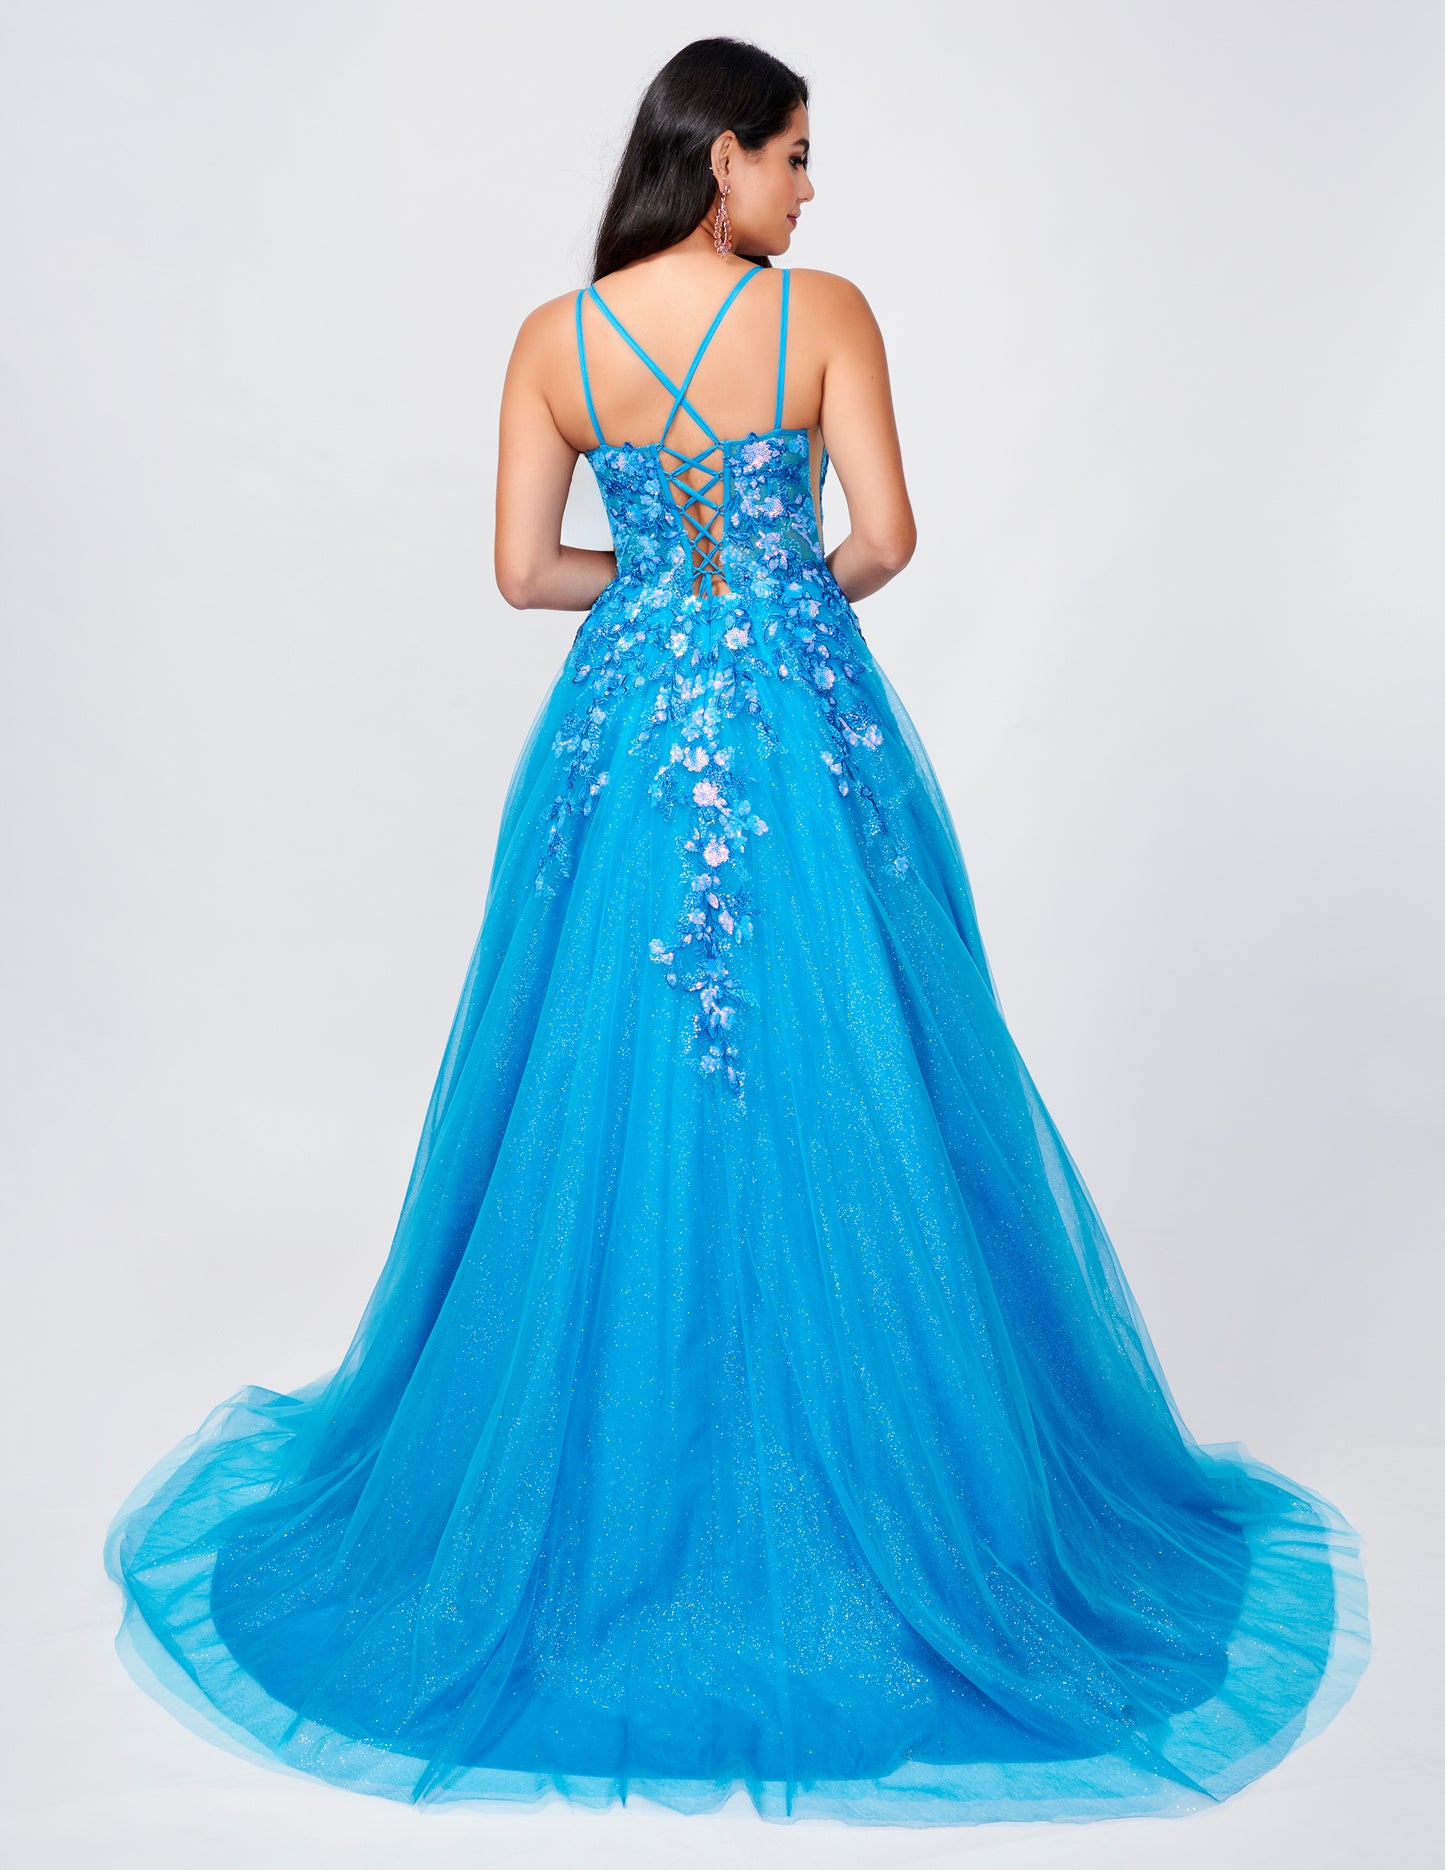 <p data-mce-fragment="1">Expertly crafted with sequin lace and a corset bodice, the Nina Canacci 3263 Prom Dress is a stunning choice for formal events. Its shimmering A-line silhouette and sheer details add a touch of elegance. Elevate your style with this timeless ball gown.</p> <p data-mce-fragment="1">Sizes: 0-14</p> <p data-mce-fragment="1">Colors: Purple, Turquoise</p>